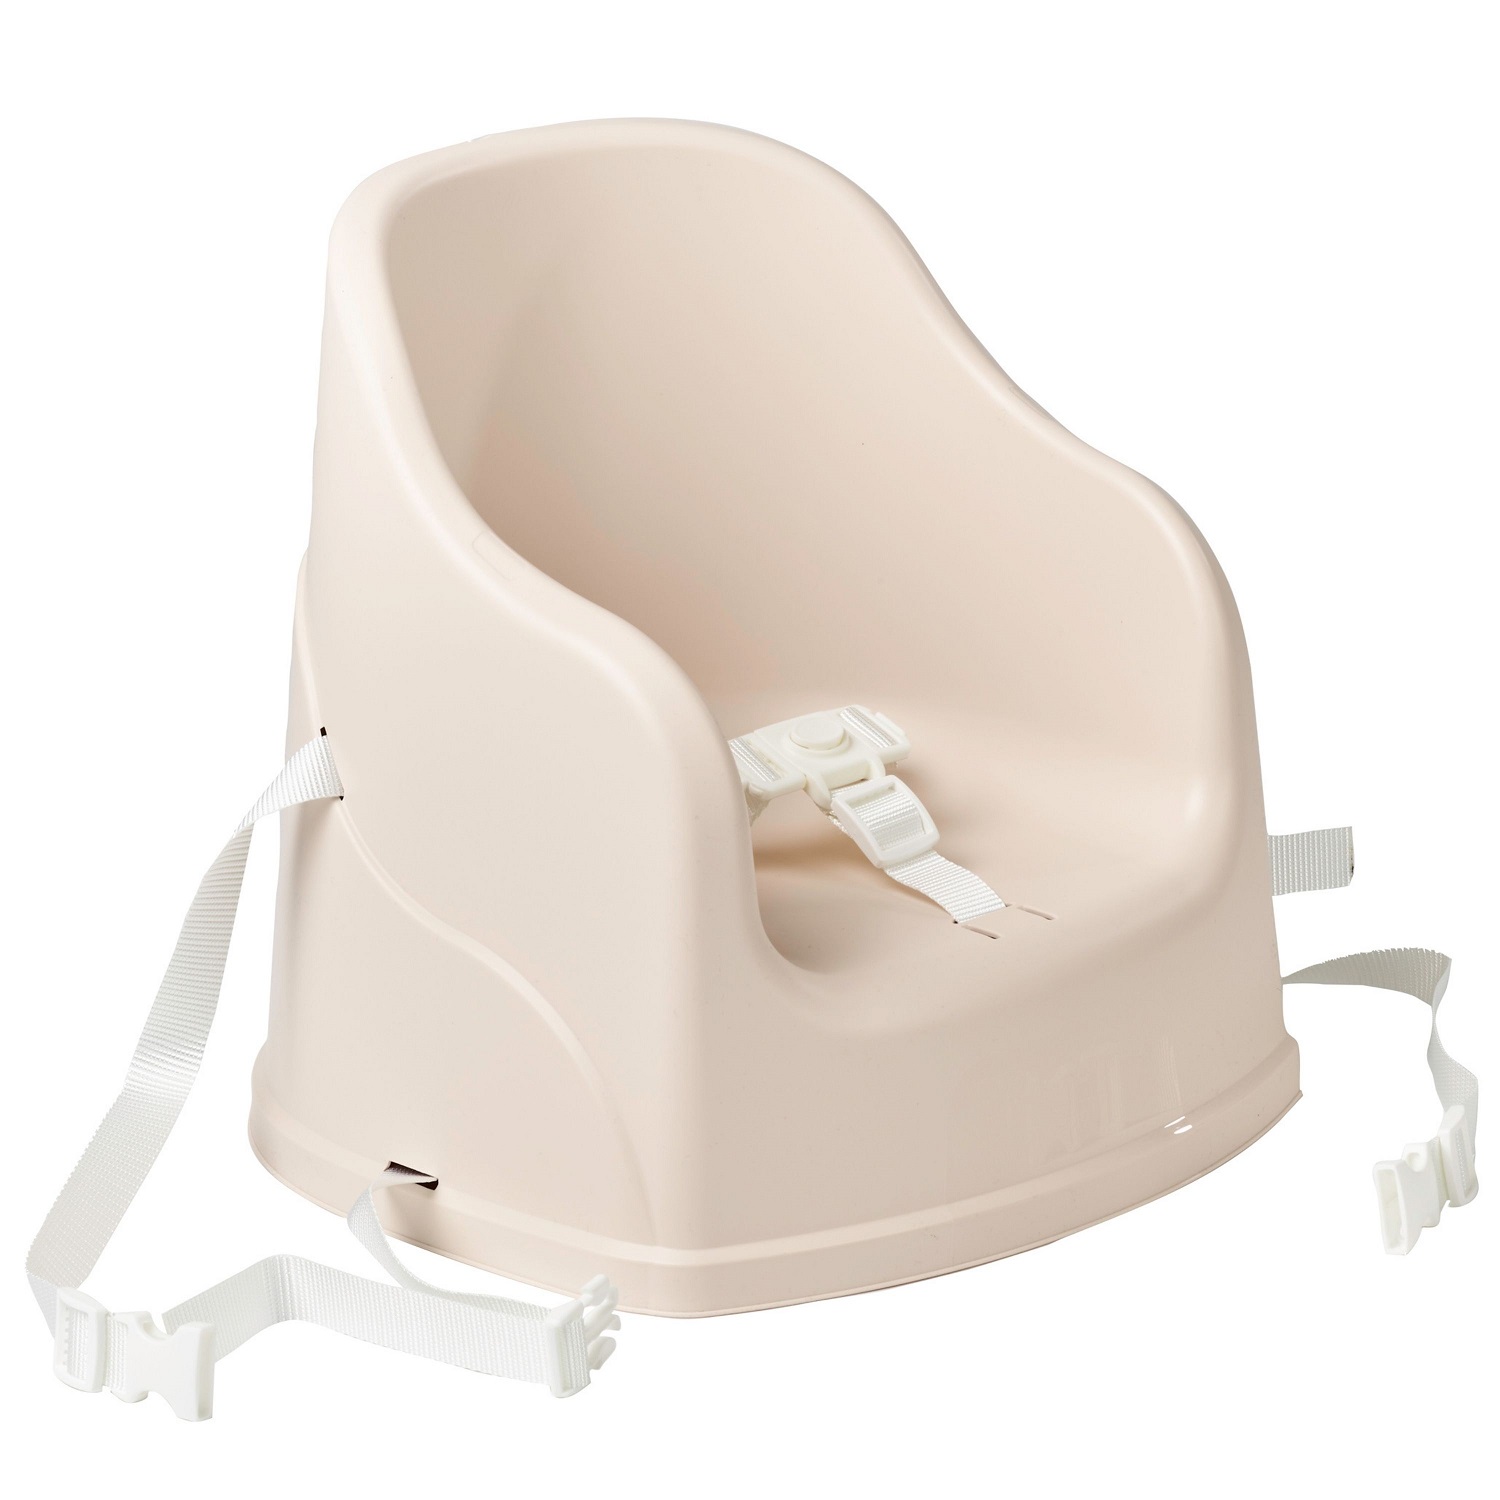 Thermobaby - Rehausseur de chaise Tudi MARRON Thermobaby